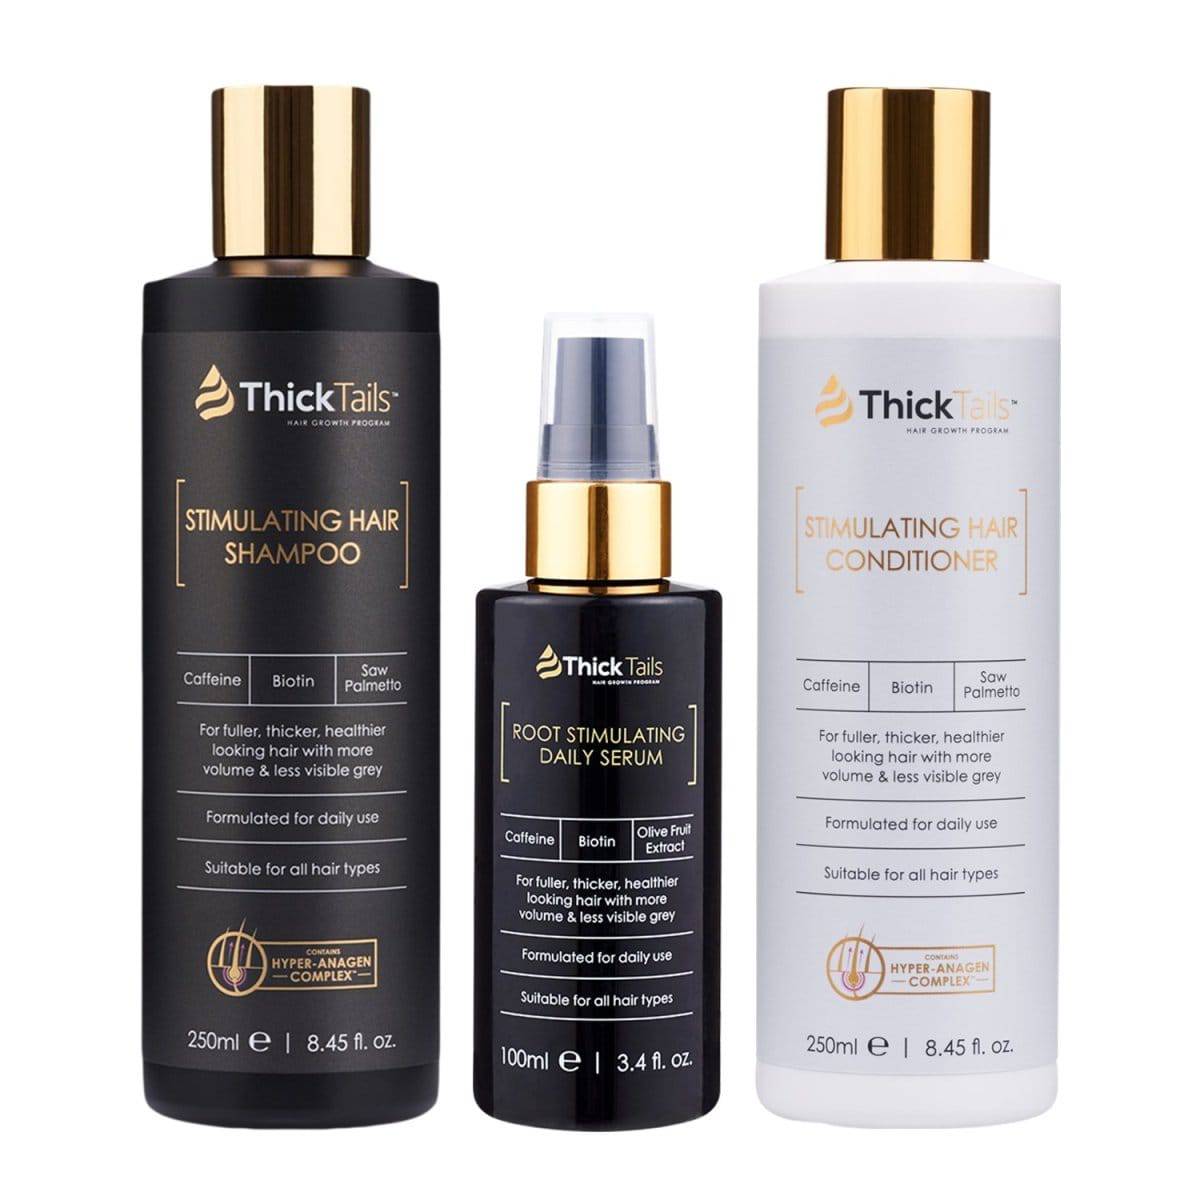 ThickTails Stimulating Hair Shampoo, Conditioner and Serum | 3-Pack